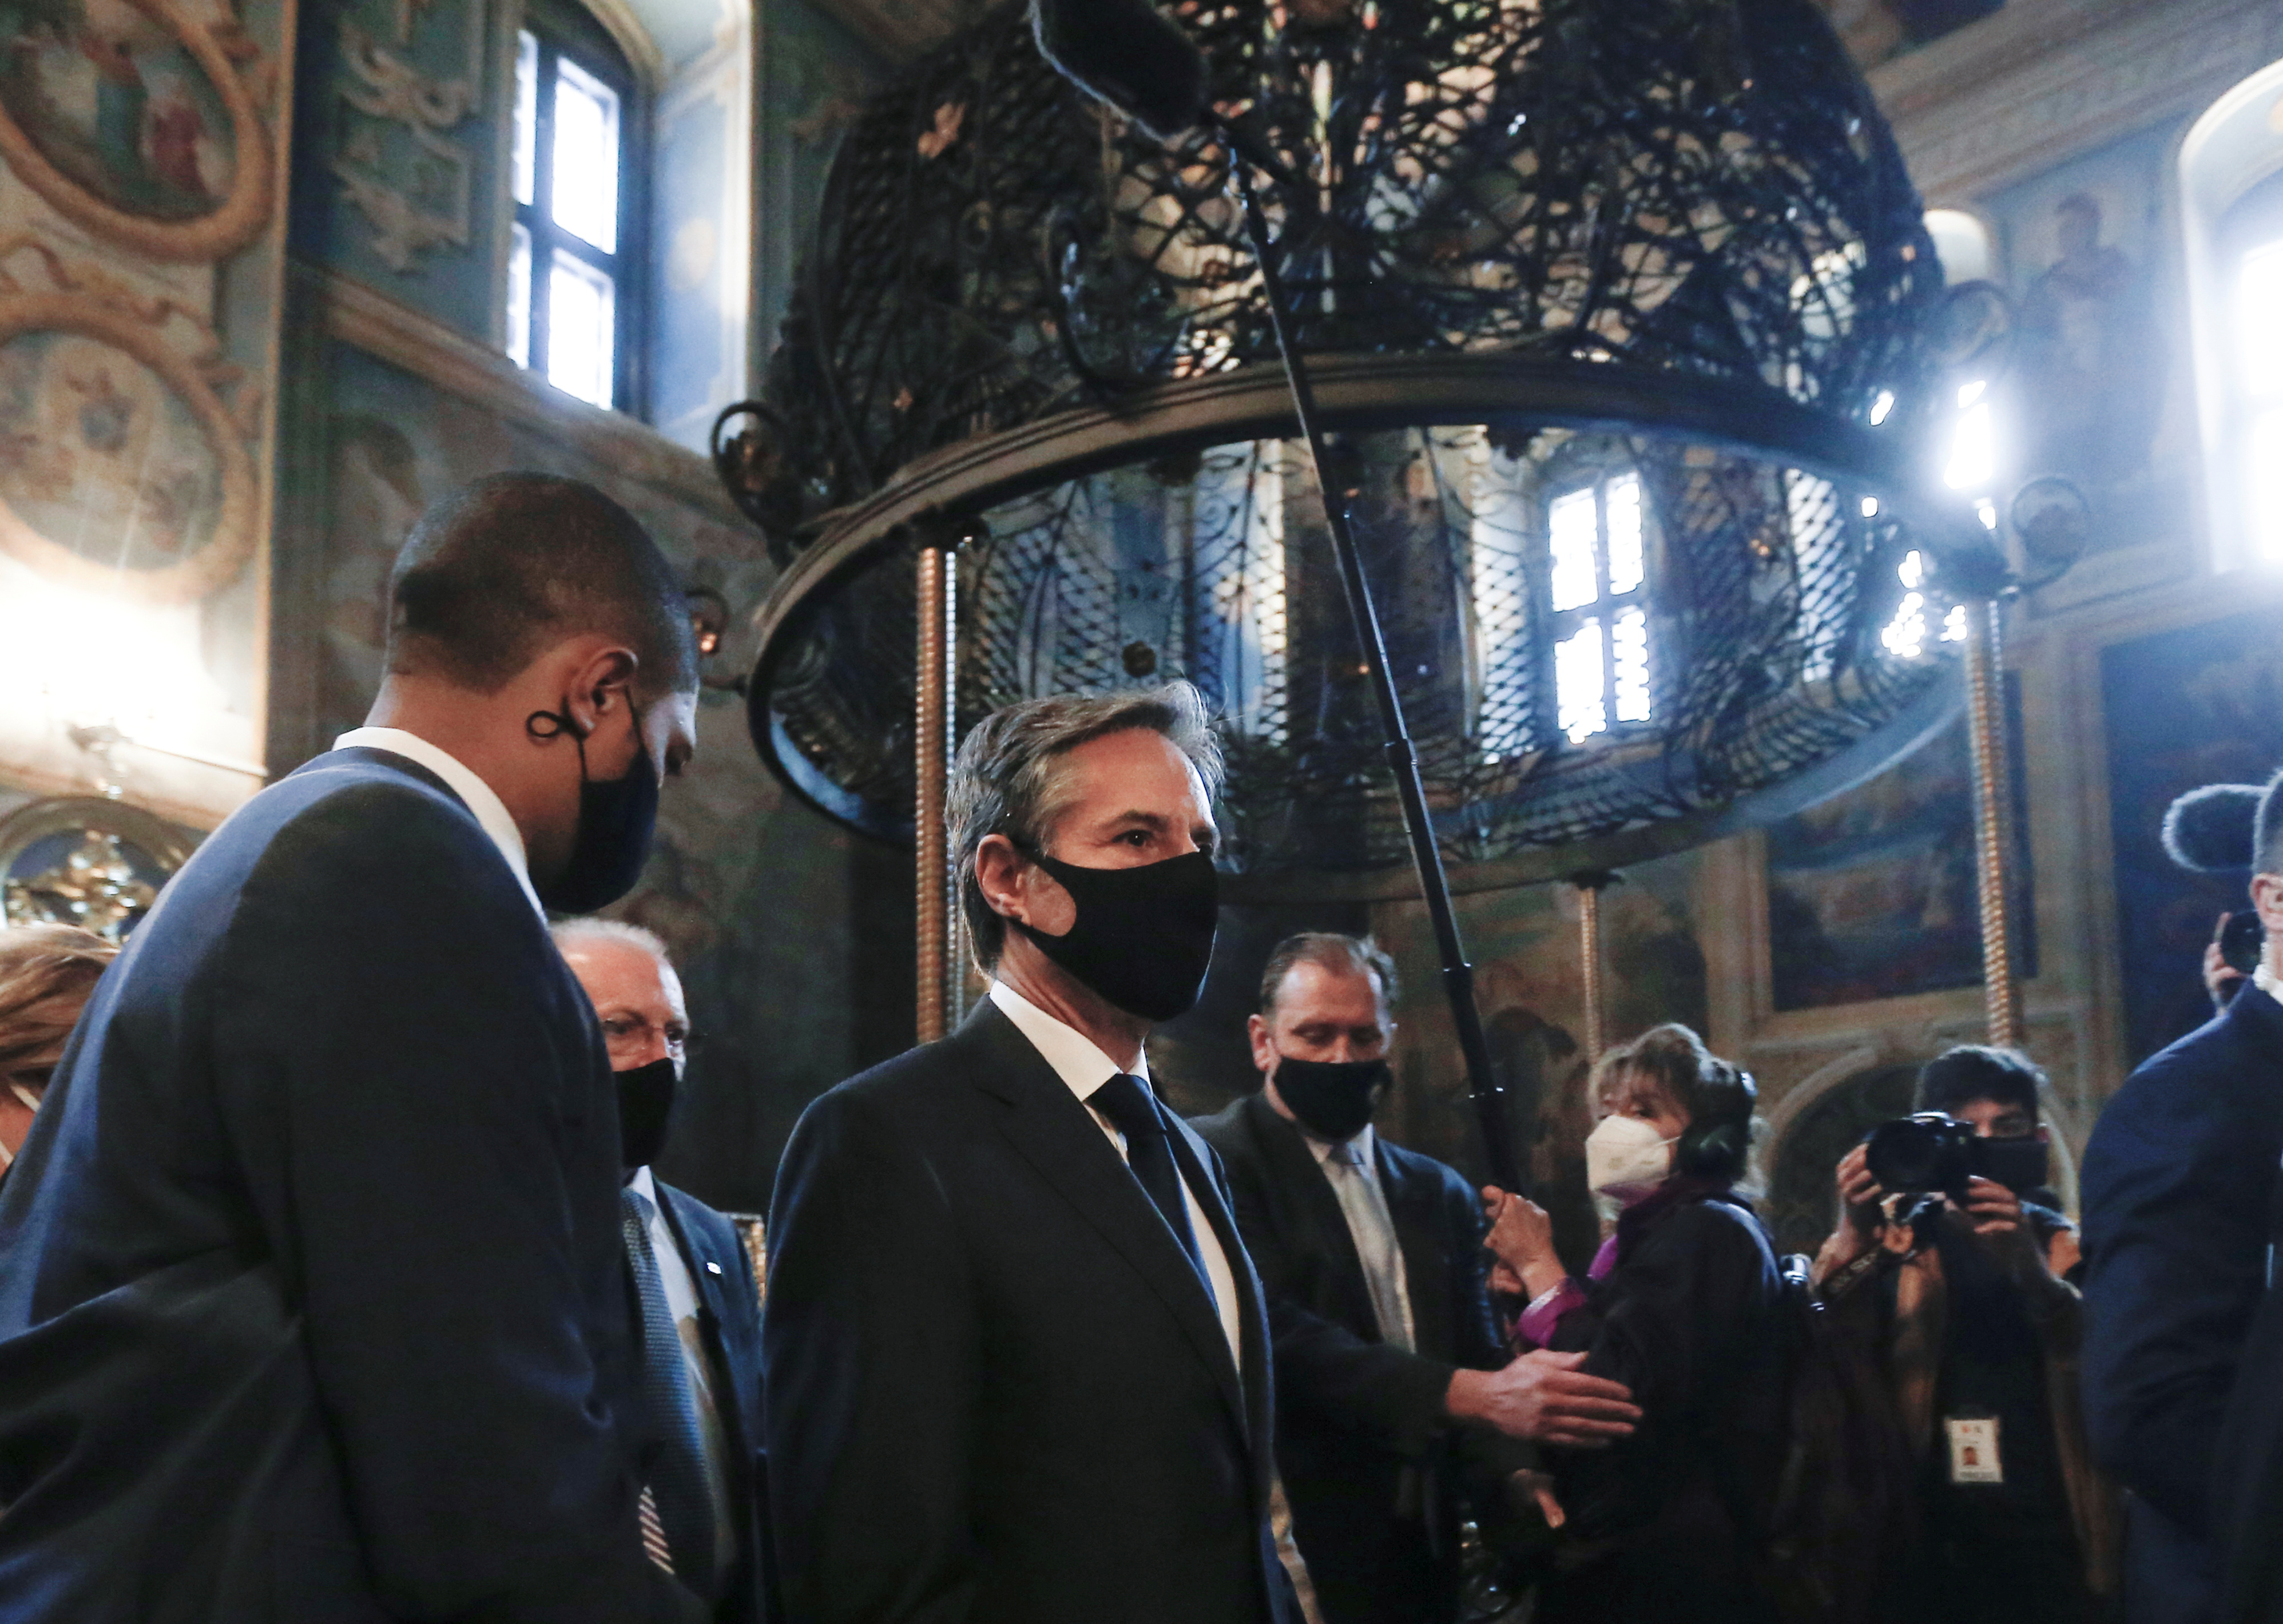 U.S. Secretary of State Antony Blinken visits the St. Michael's Golden-Domed Cathedral in Kyiv